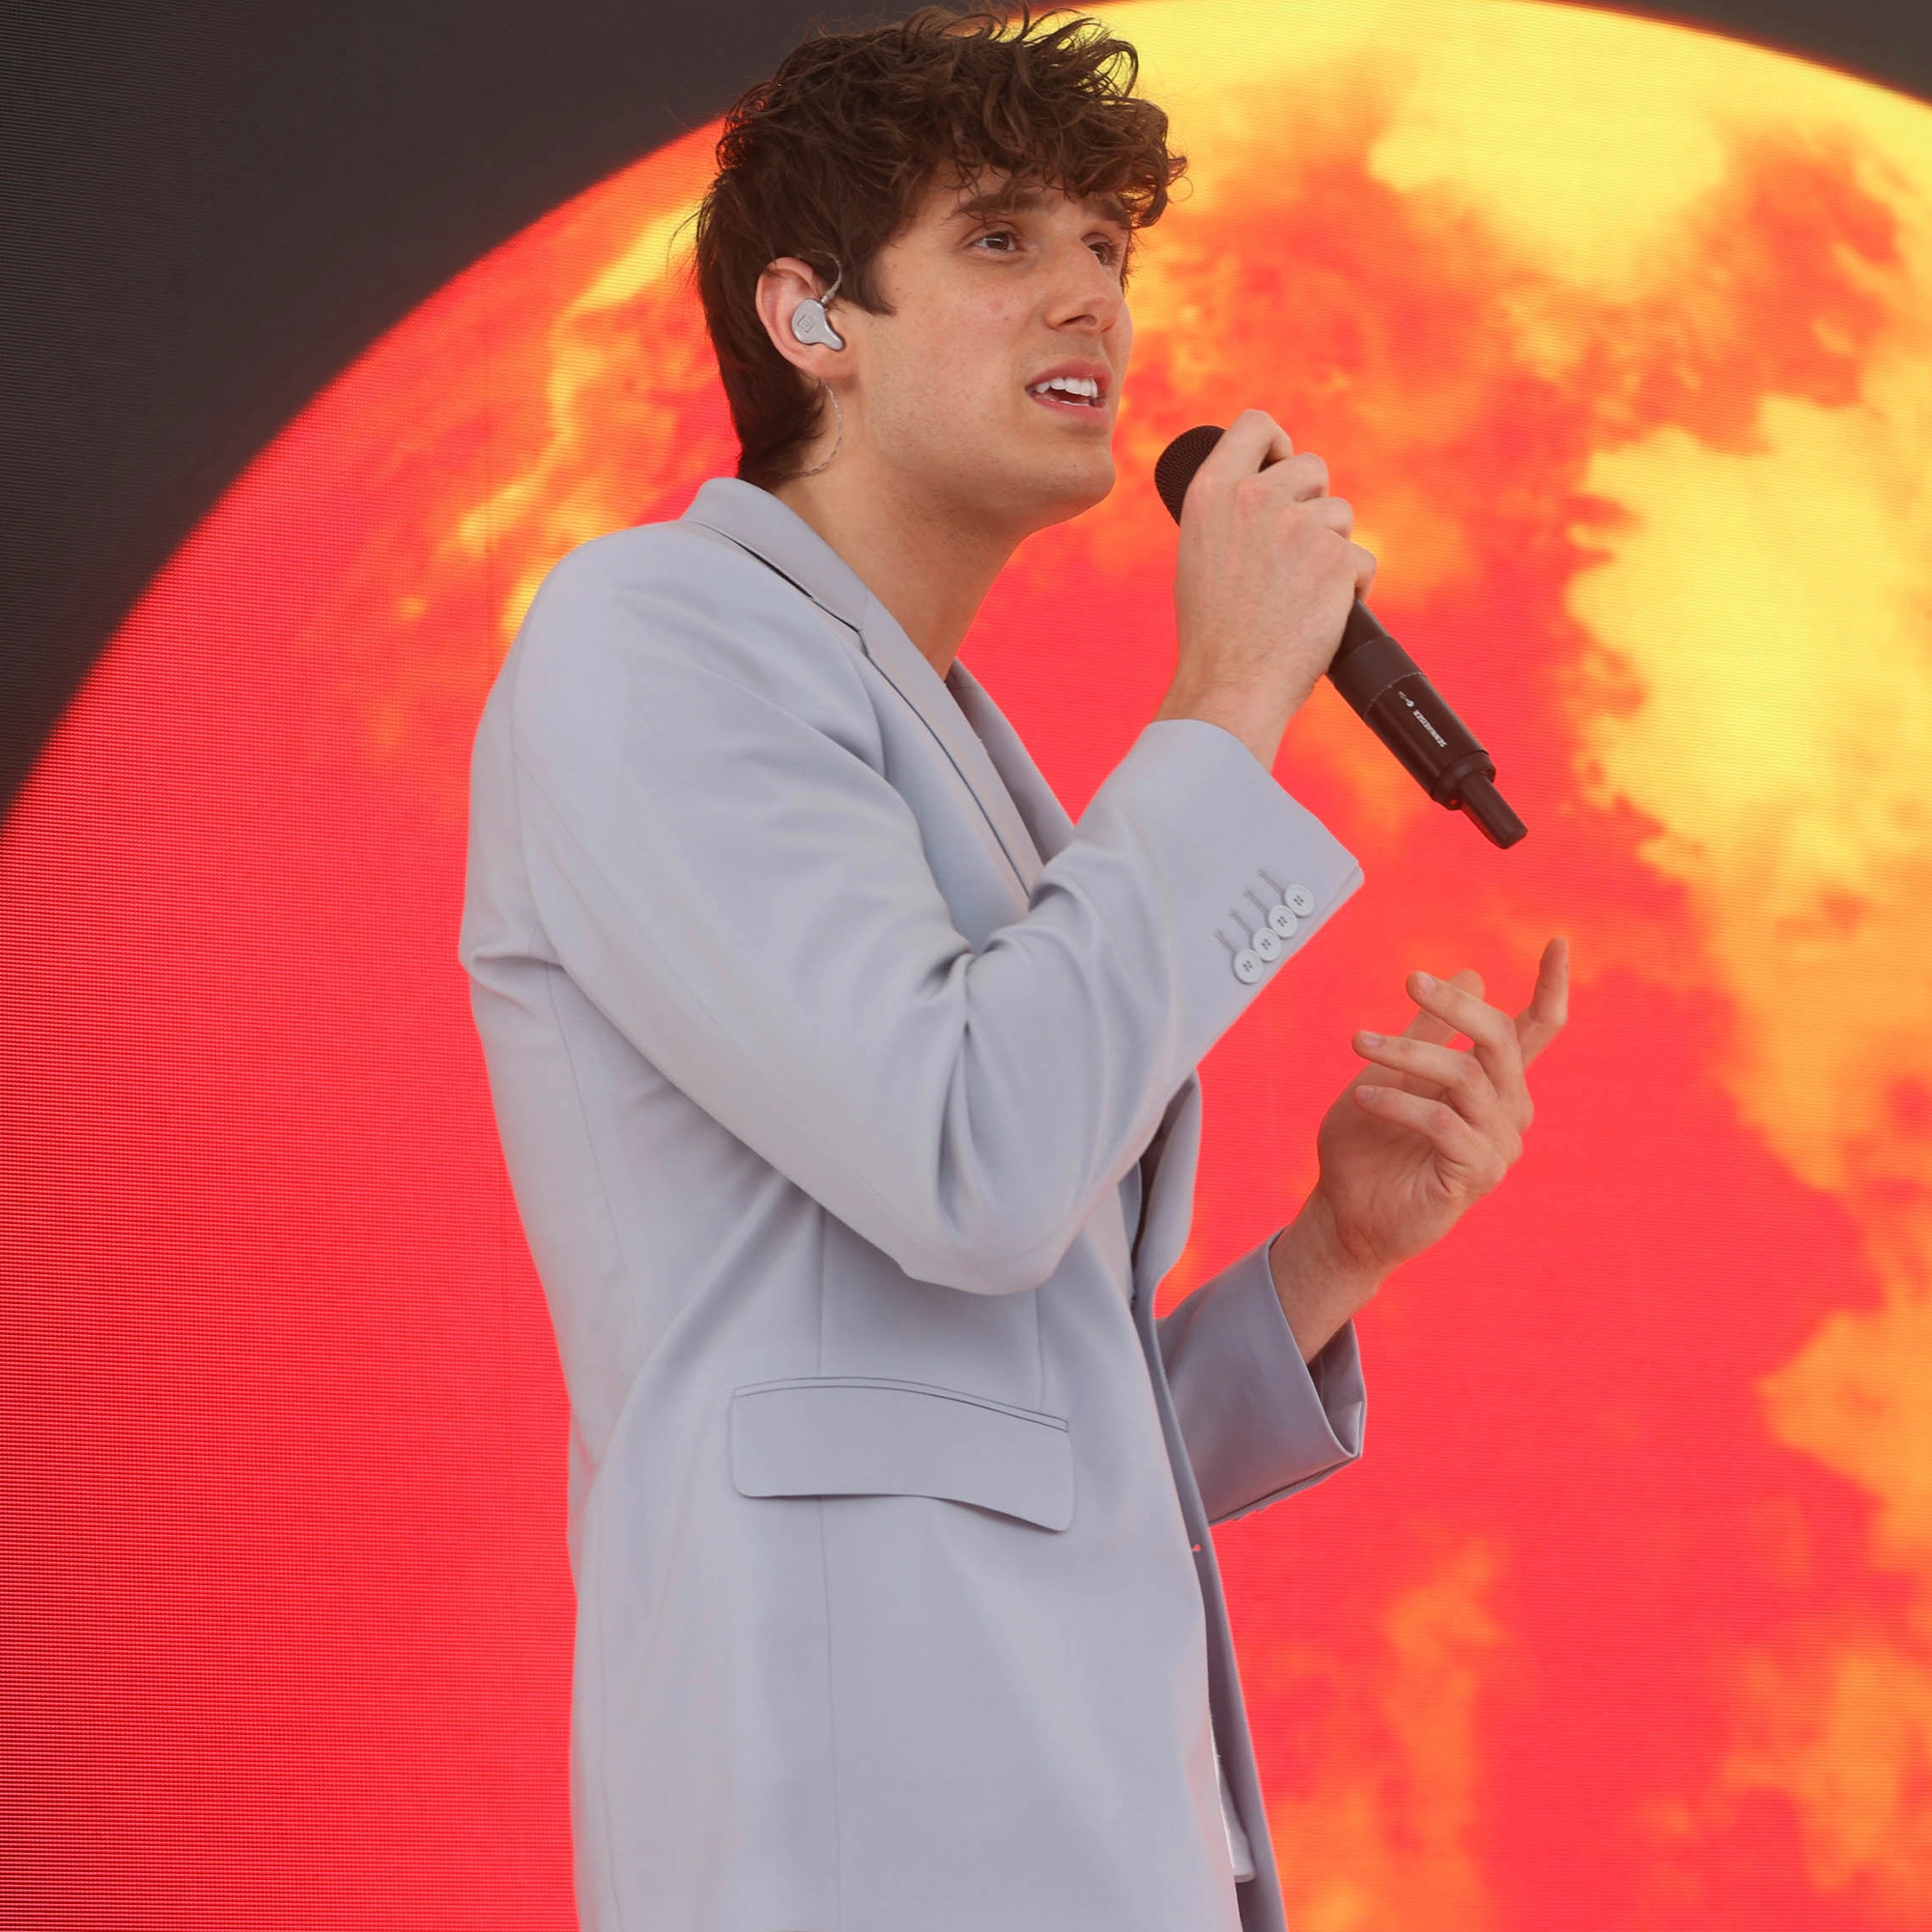 JVKE singing in front of a large sun image